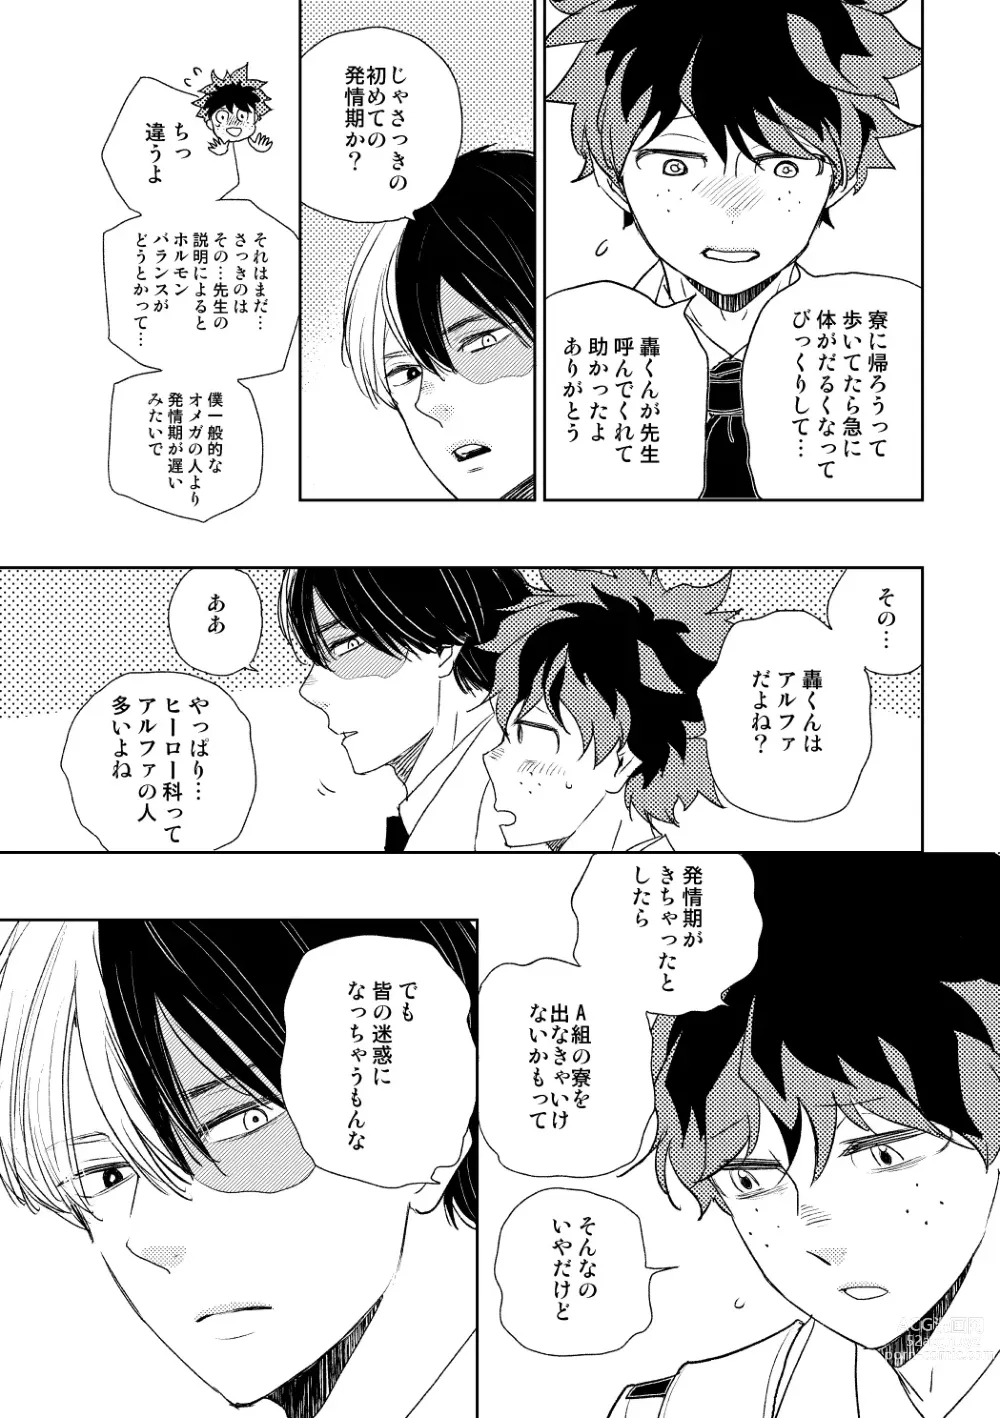 Page 10 of doujinshi DISTANCE